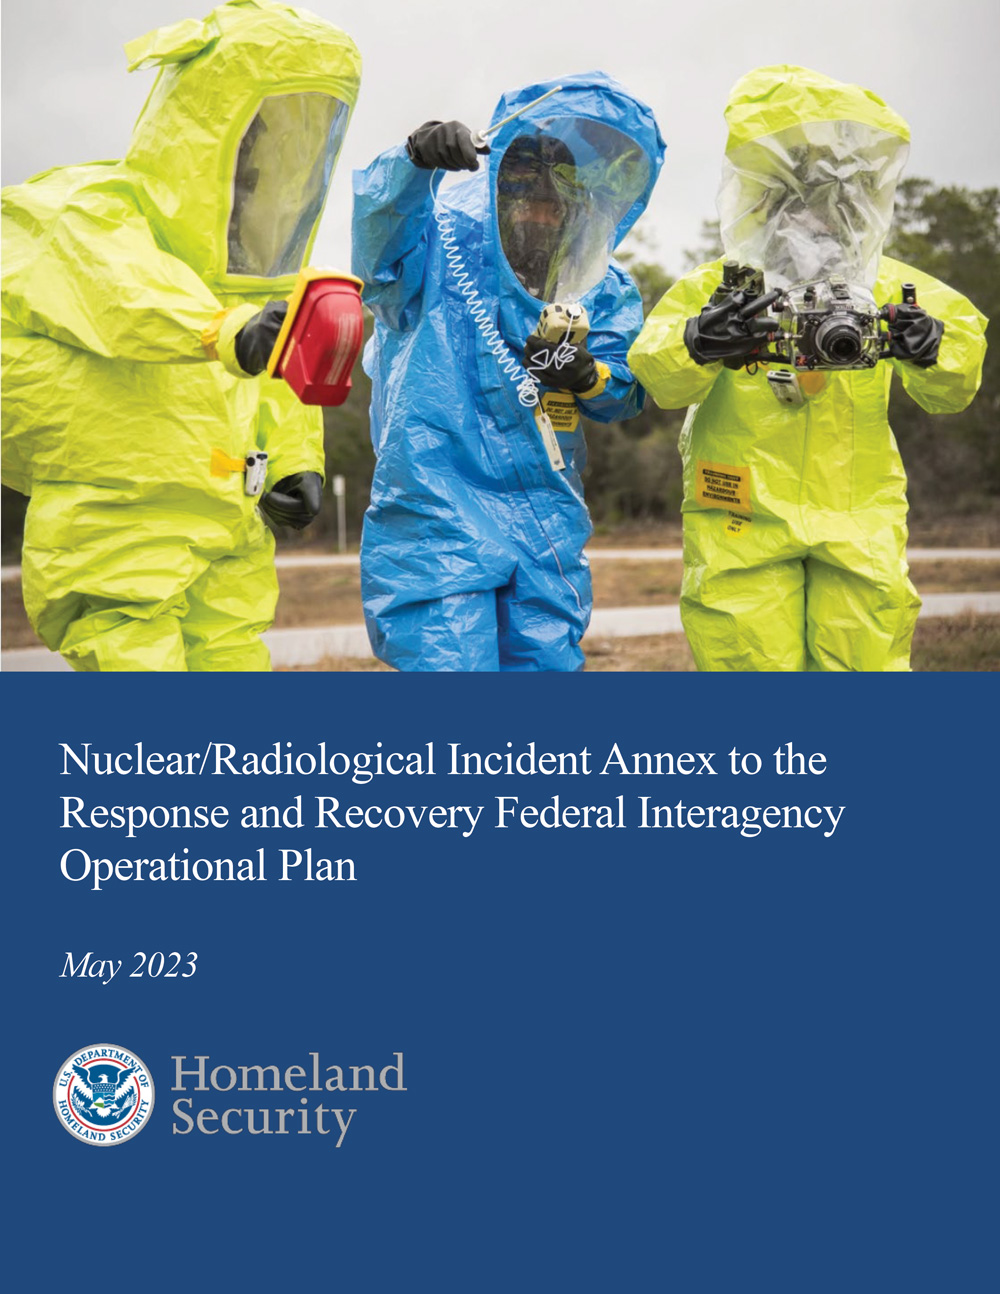 Nuclear/Radiological Incident Annex to the Response and Recovery Federal Interagency Operational Plans, report cover